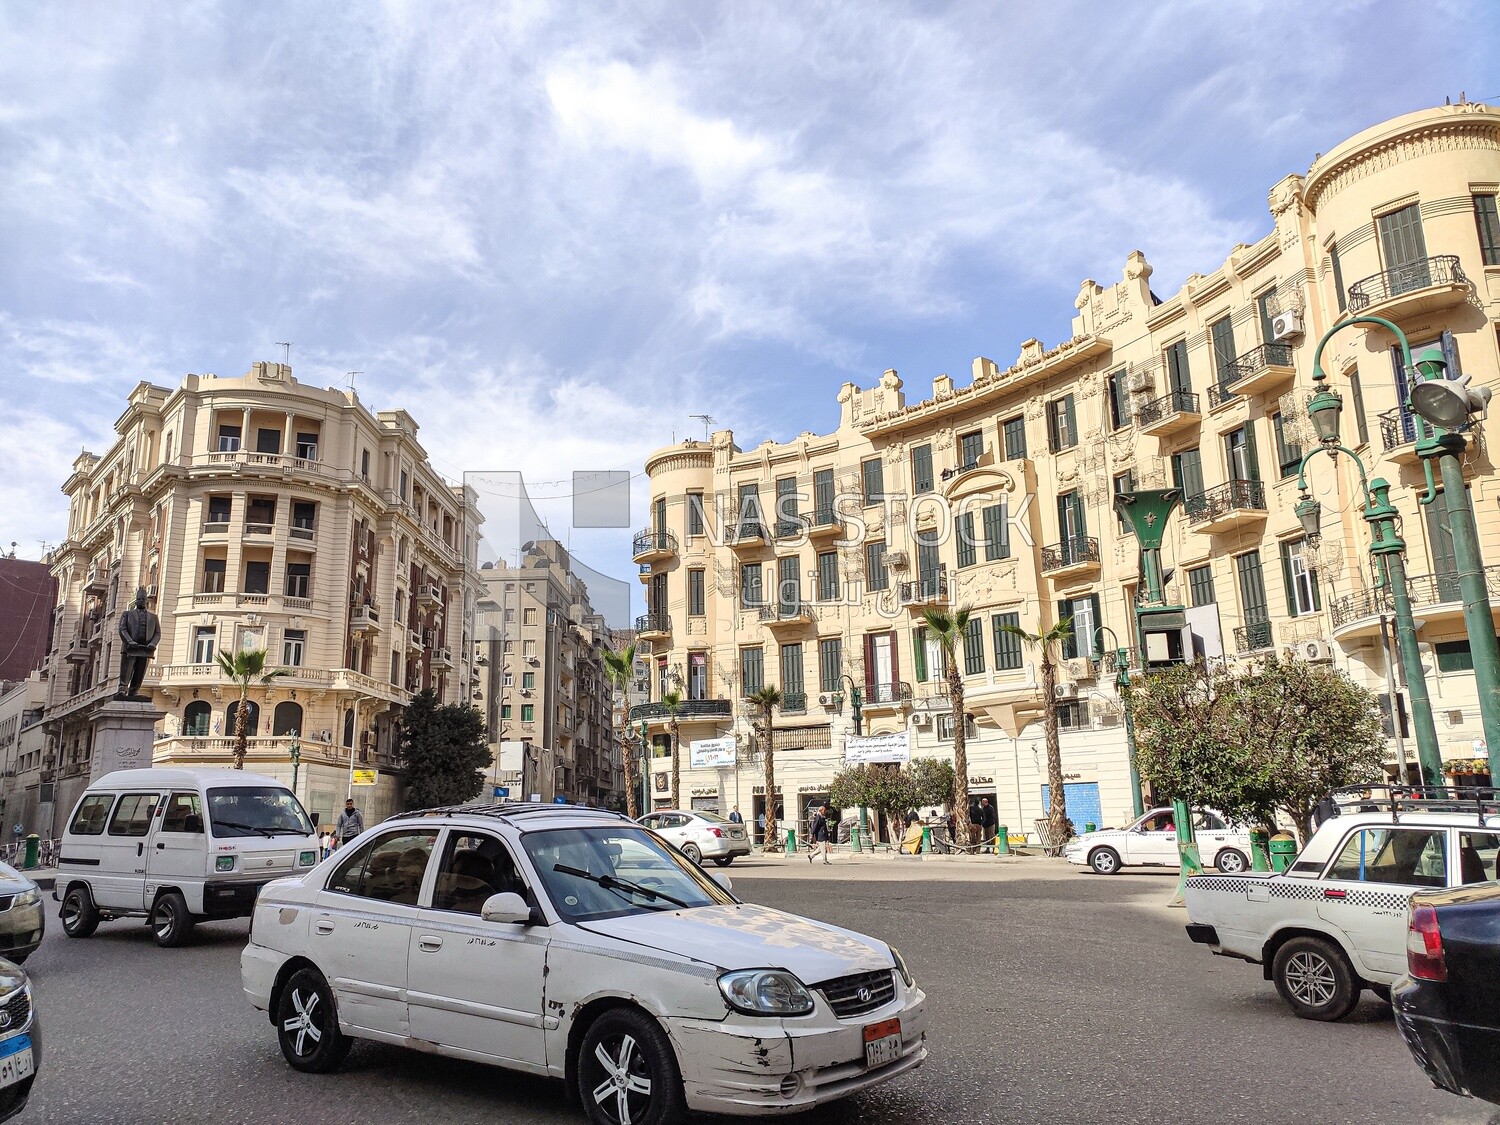 Downtown streets in Cairo